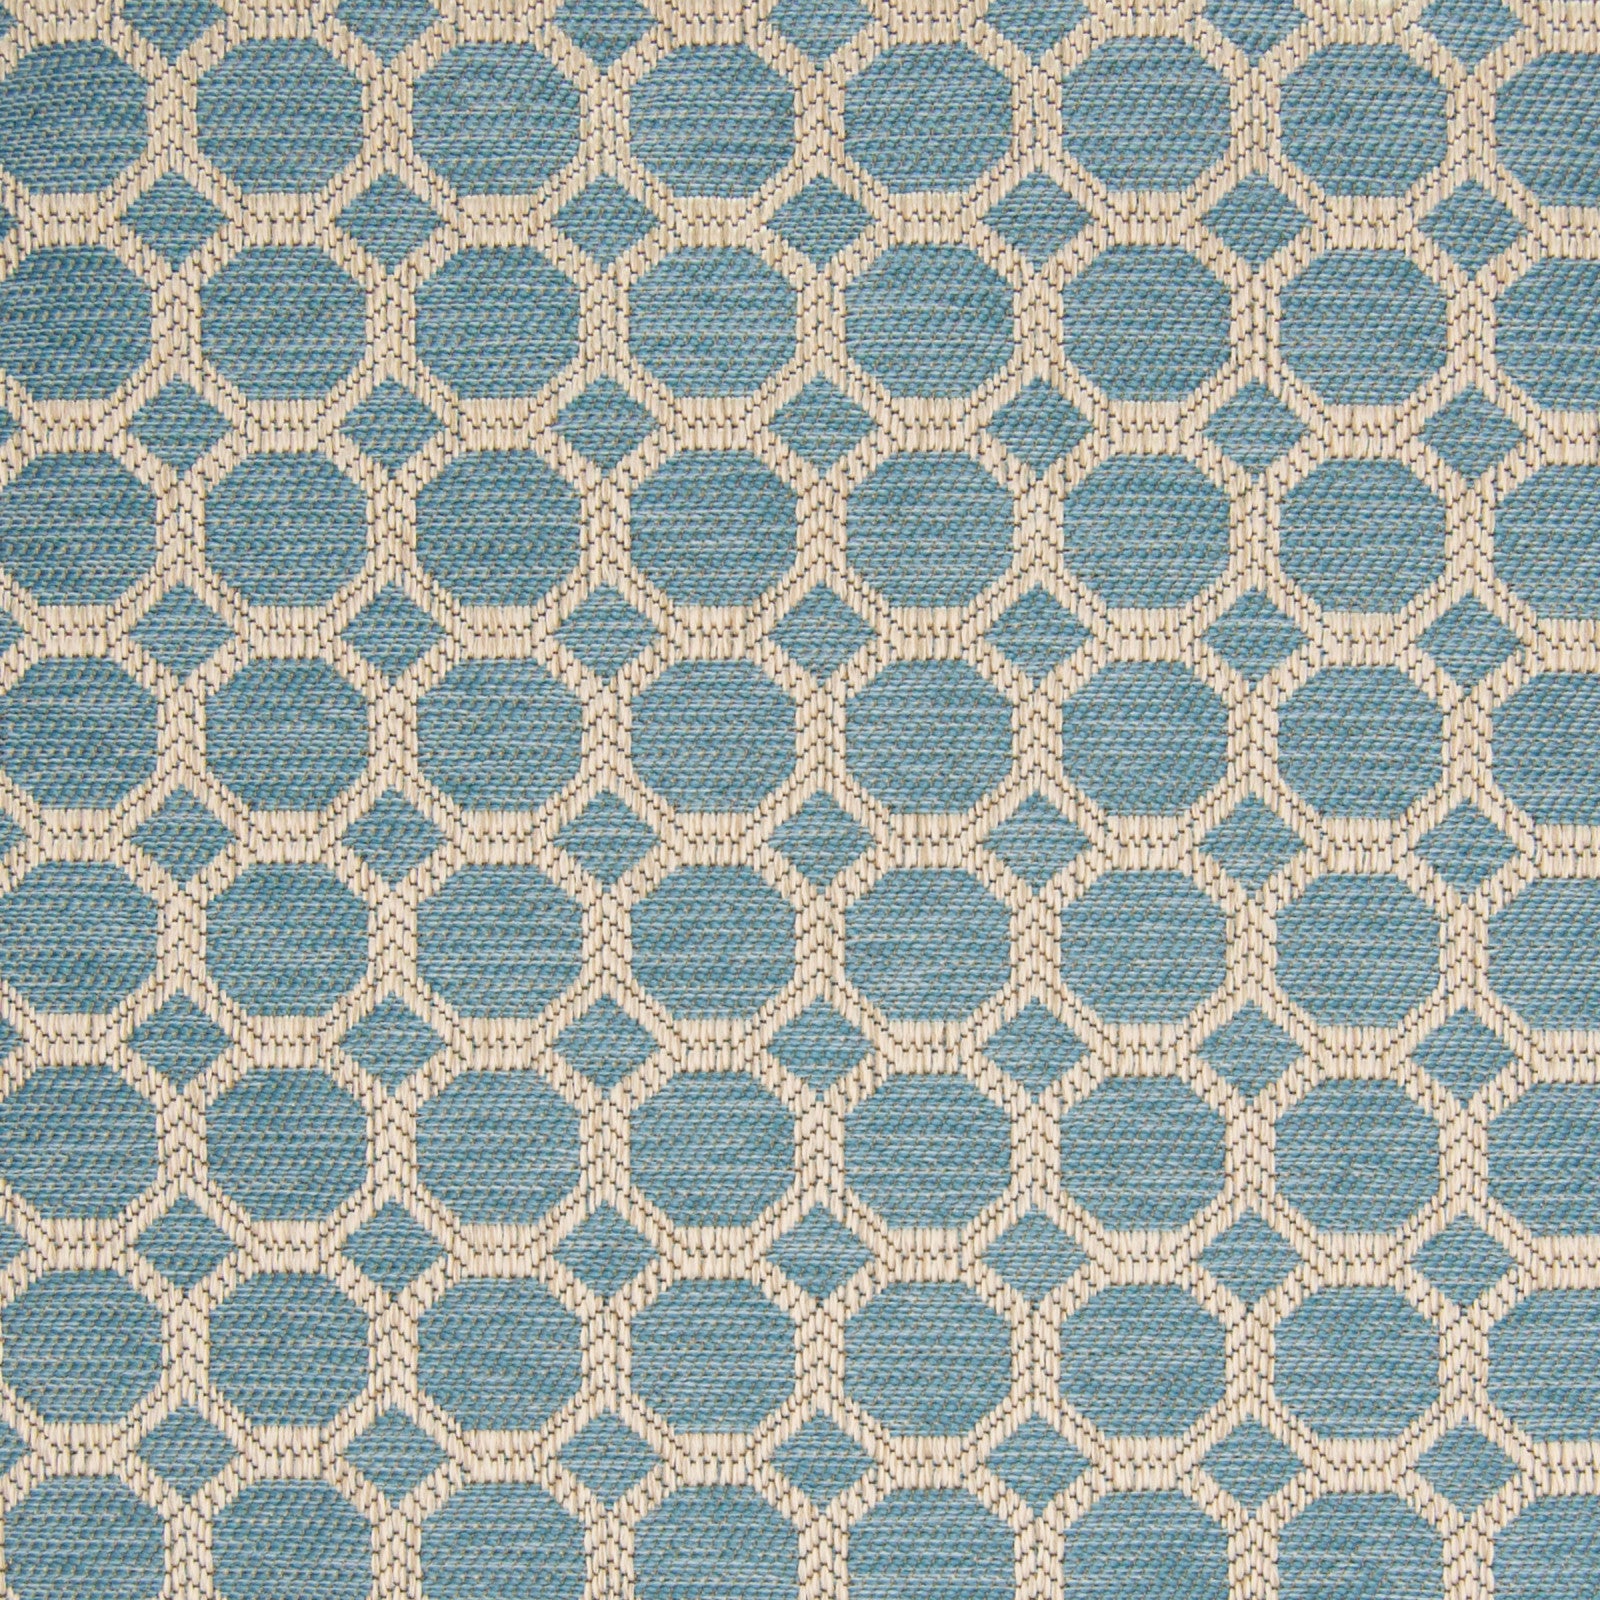 Purchase Greenhouse Fabric B8301 Teal